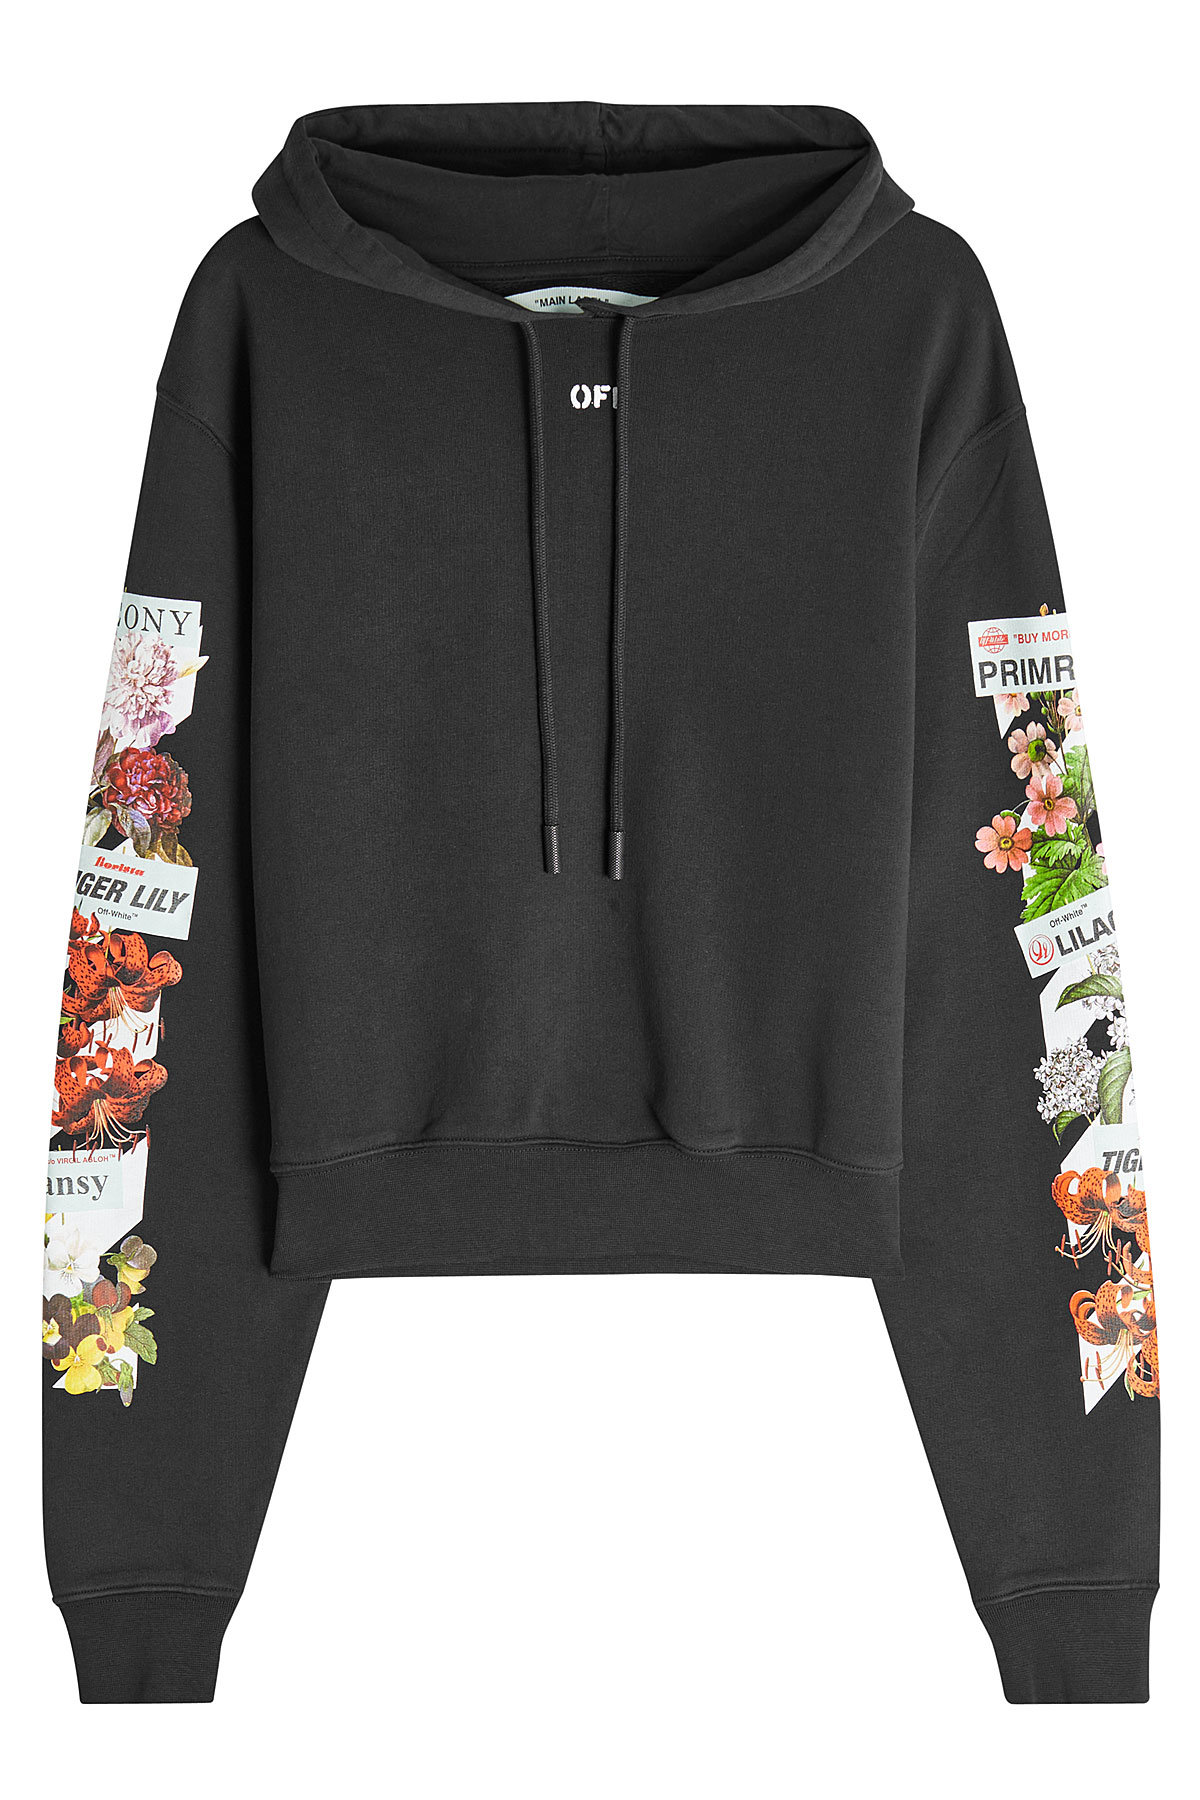 Off-White - Flower Shop Printed Cotton Hoody